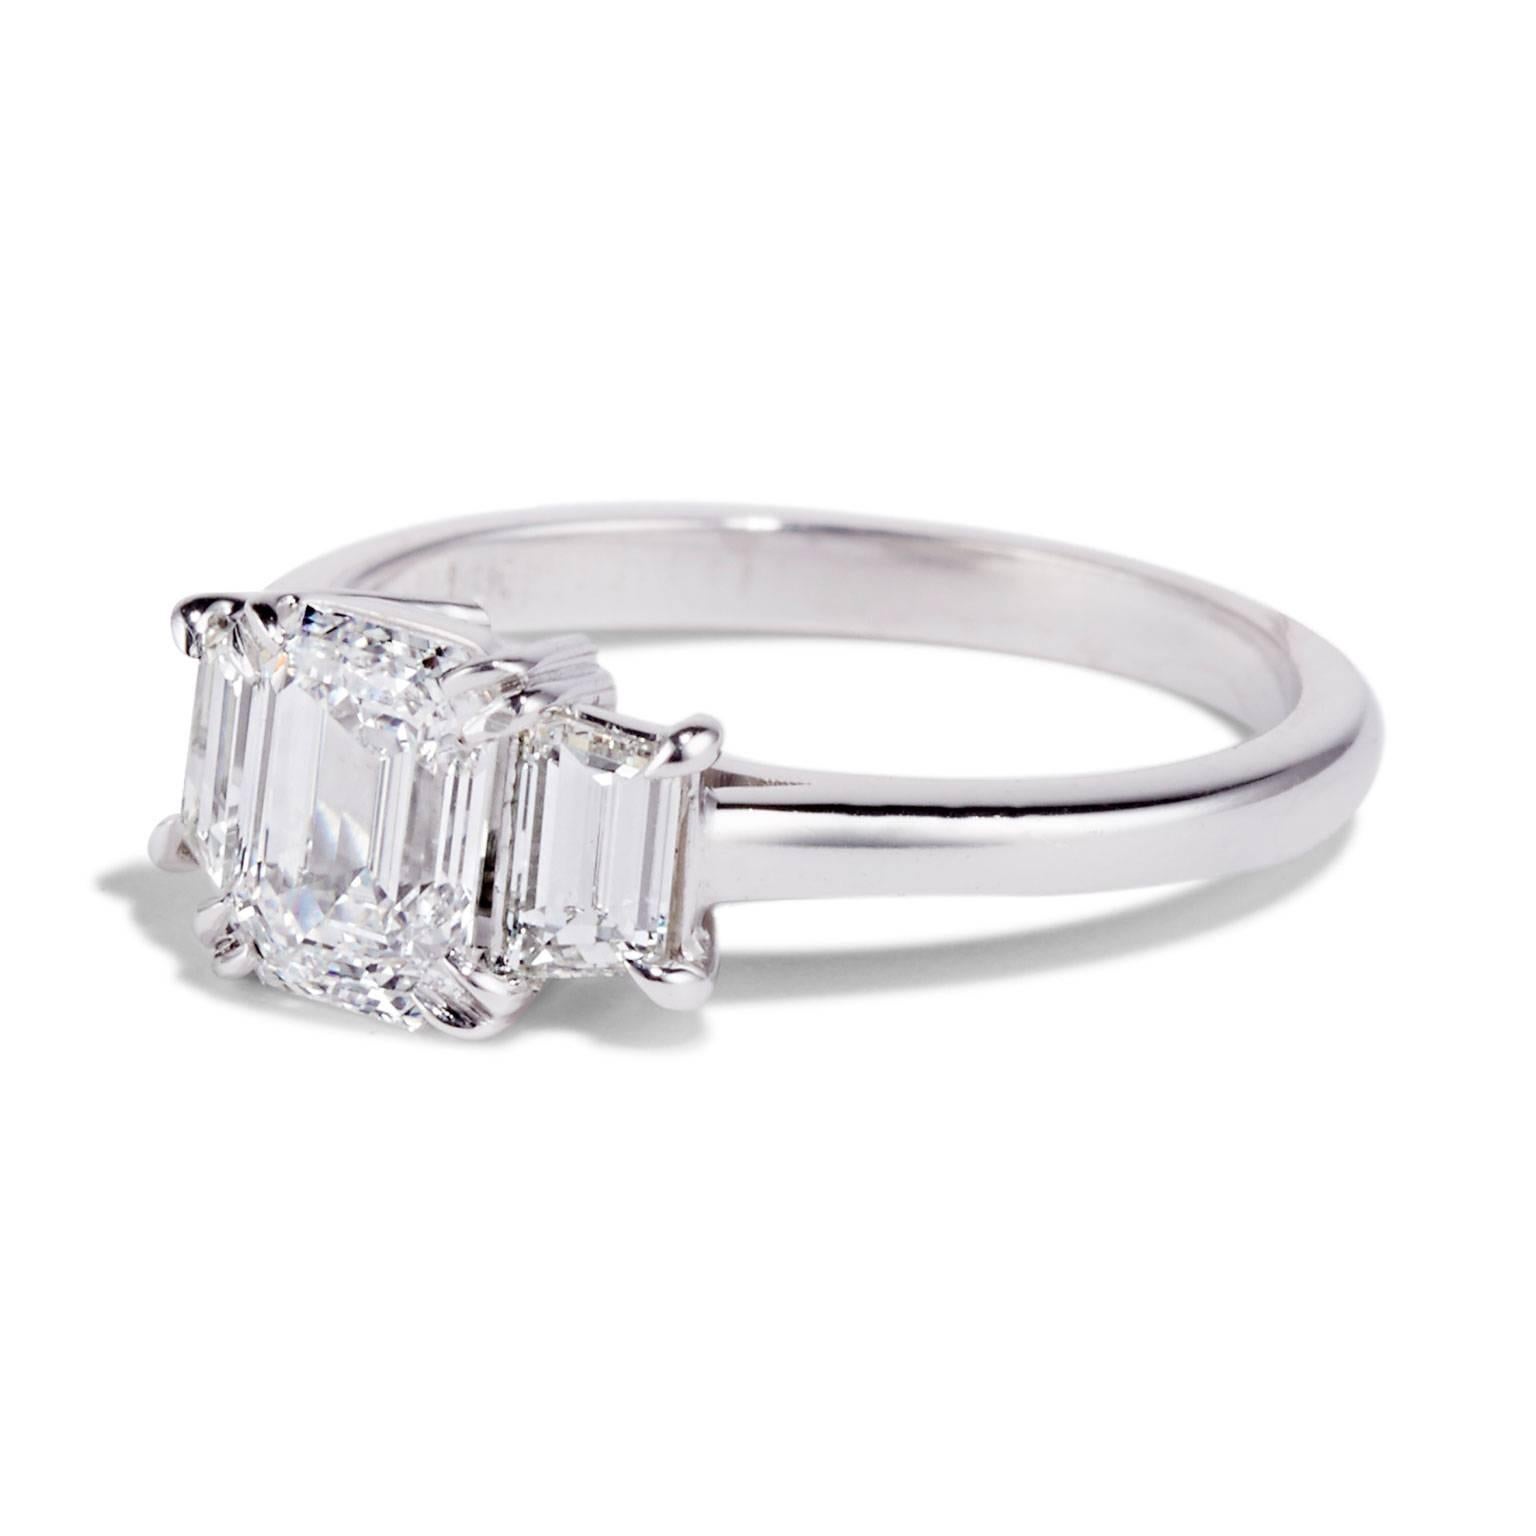 Cushla Whiting's SOFIA design is a contemporary take on a classic art deco three-stone style. This impeccably cut geometric setting is a truly sophisticated and rare choice for the perfect engagement ring. 

Image shows the SOFIA ring made in 18